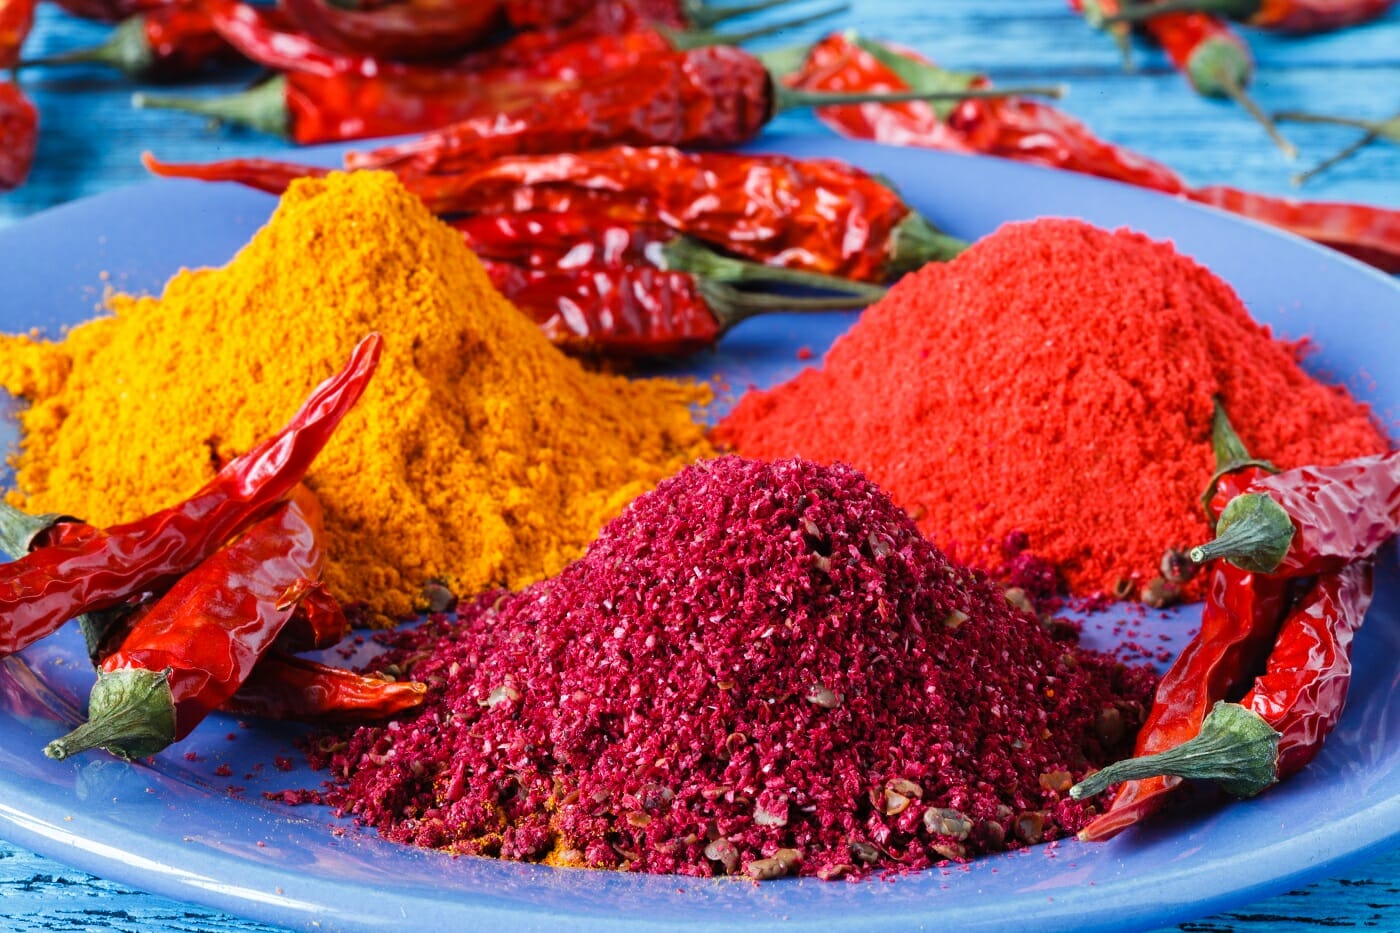 FSSAI to Carry Out Enforcement Drives to Check Sale of Adulterated Spices -  Food Safety Helpline